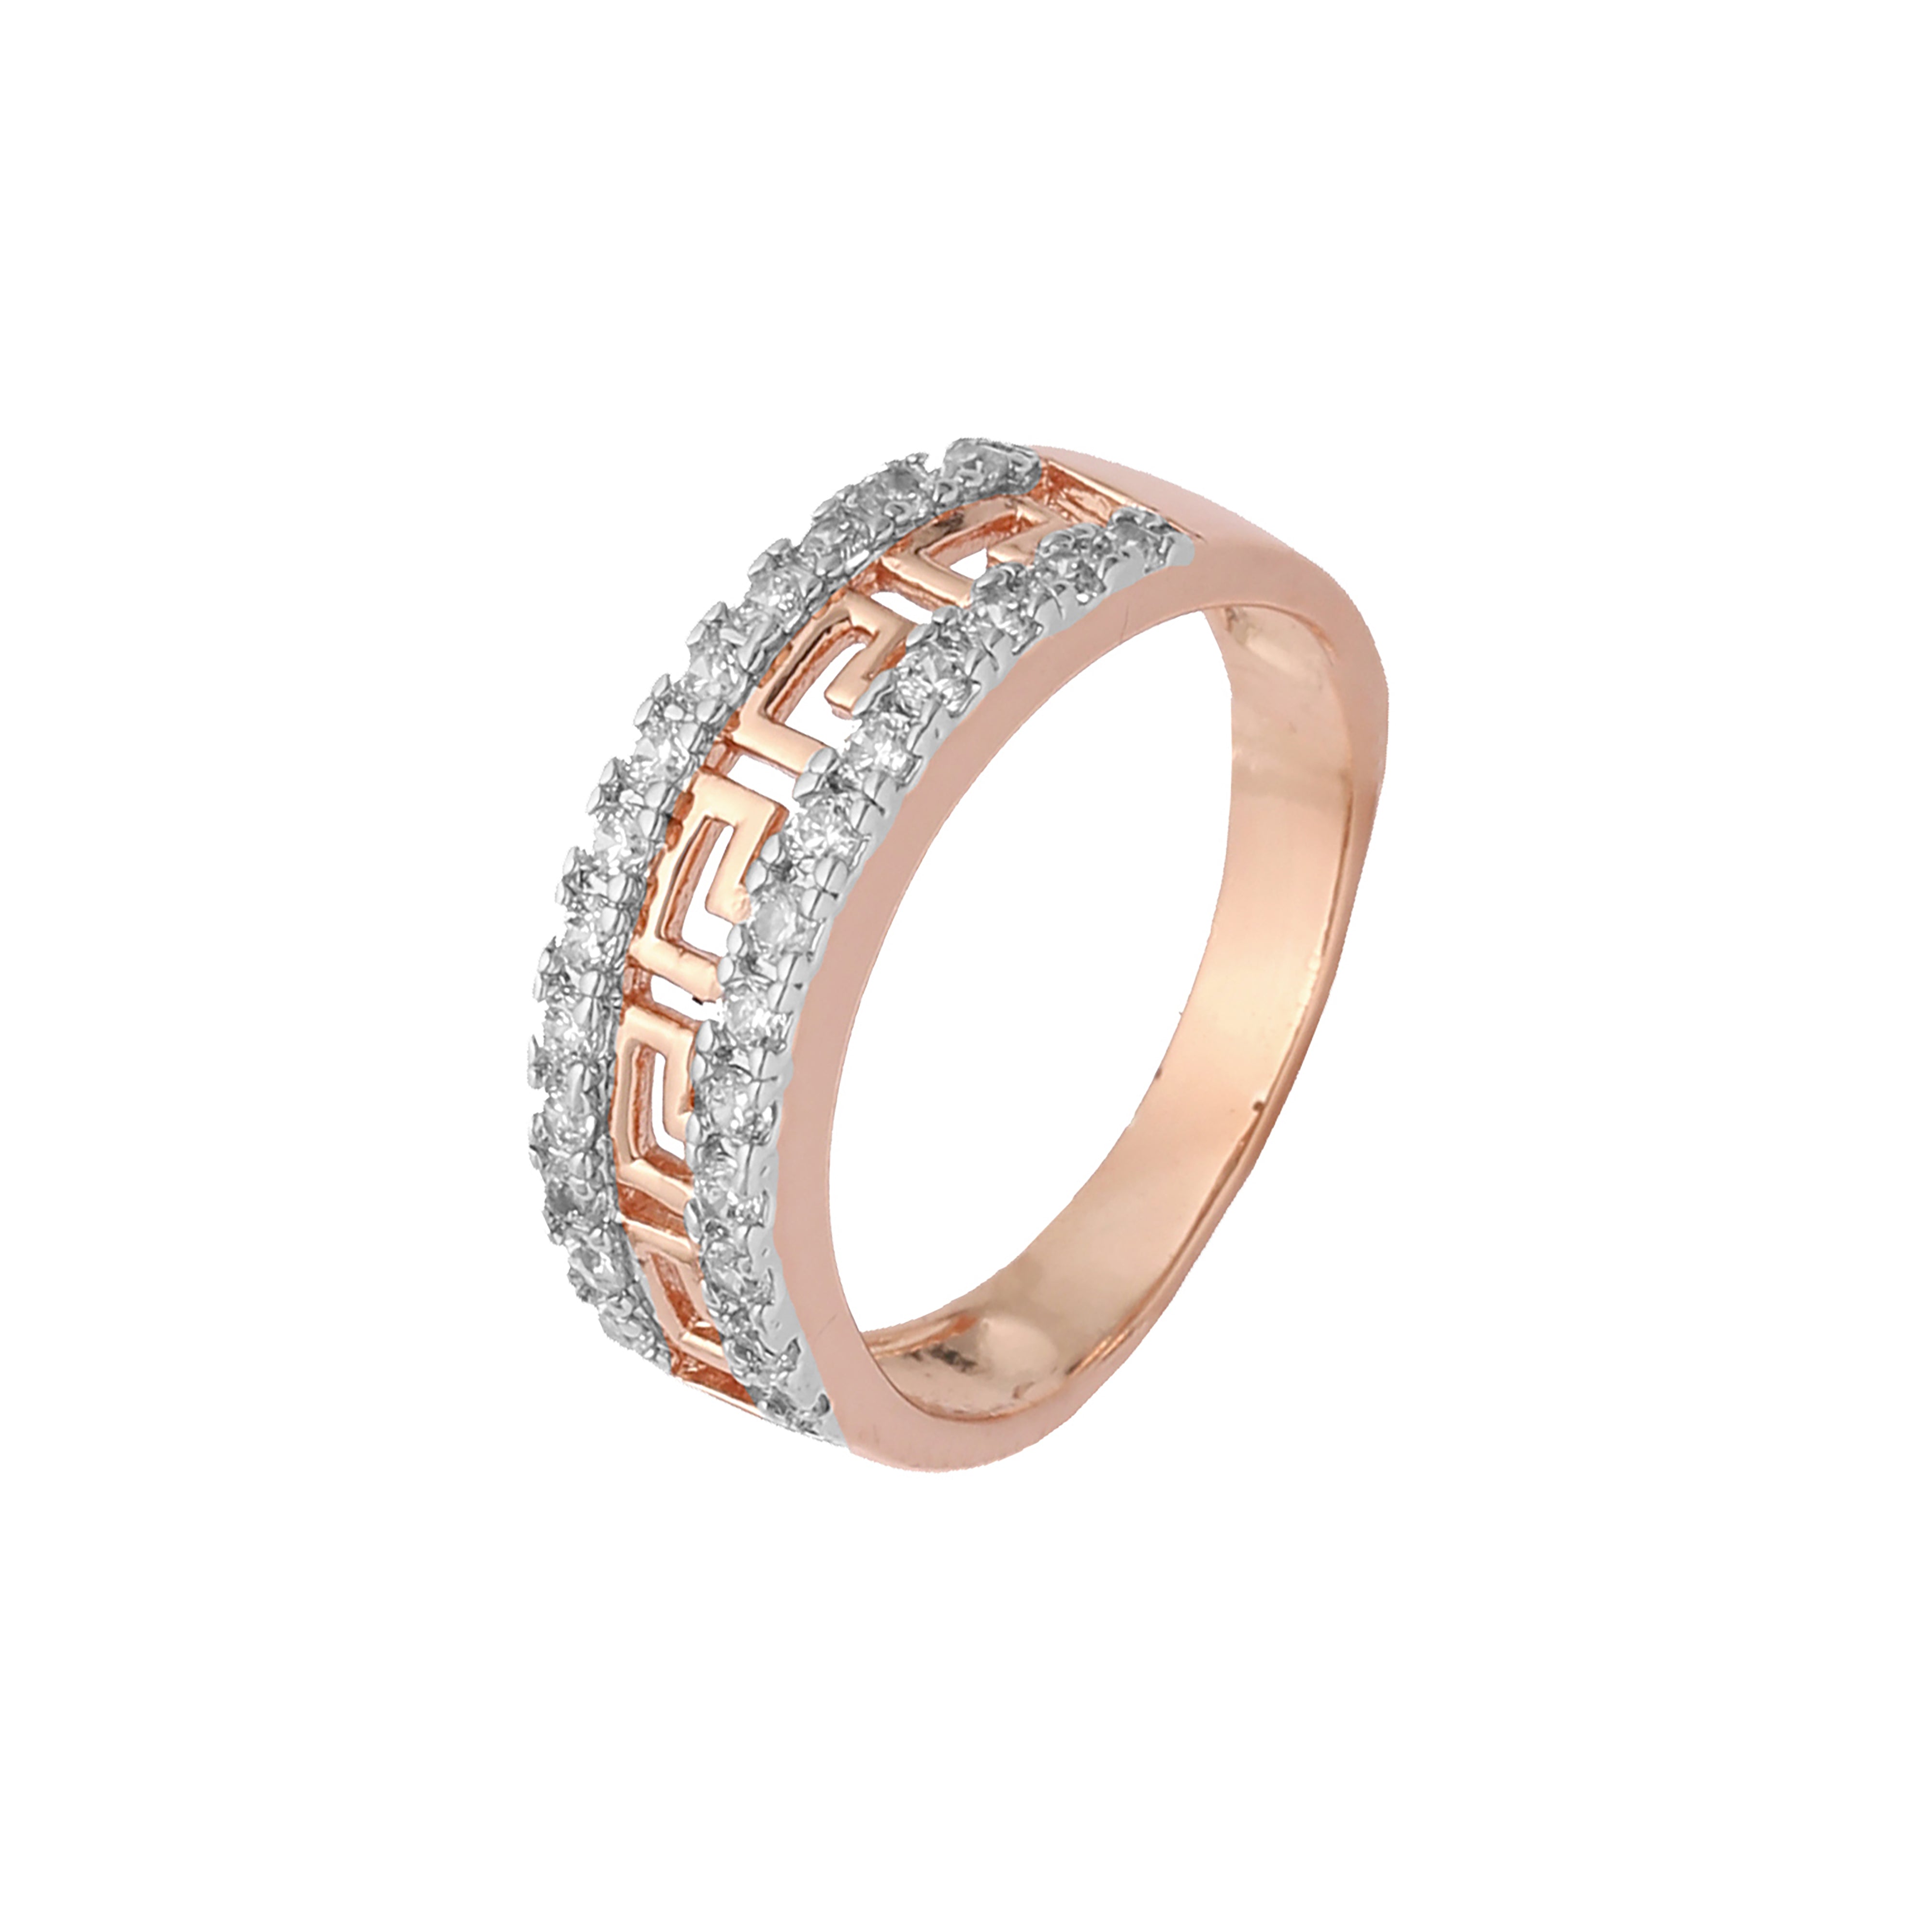 Greek key meander rings in 18K Gold, White Gold,14K Gold, Rose Gold, two tone plating colors